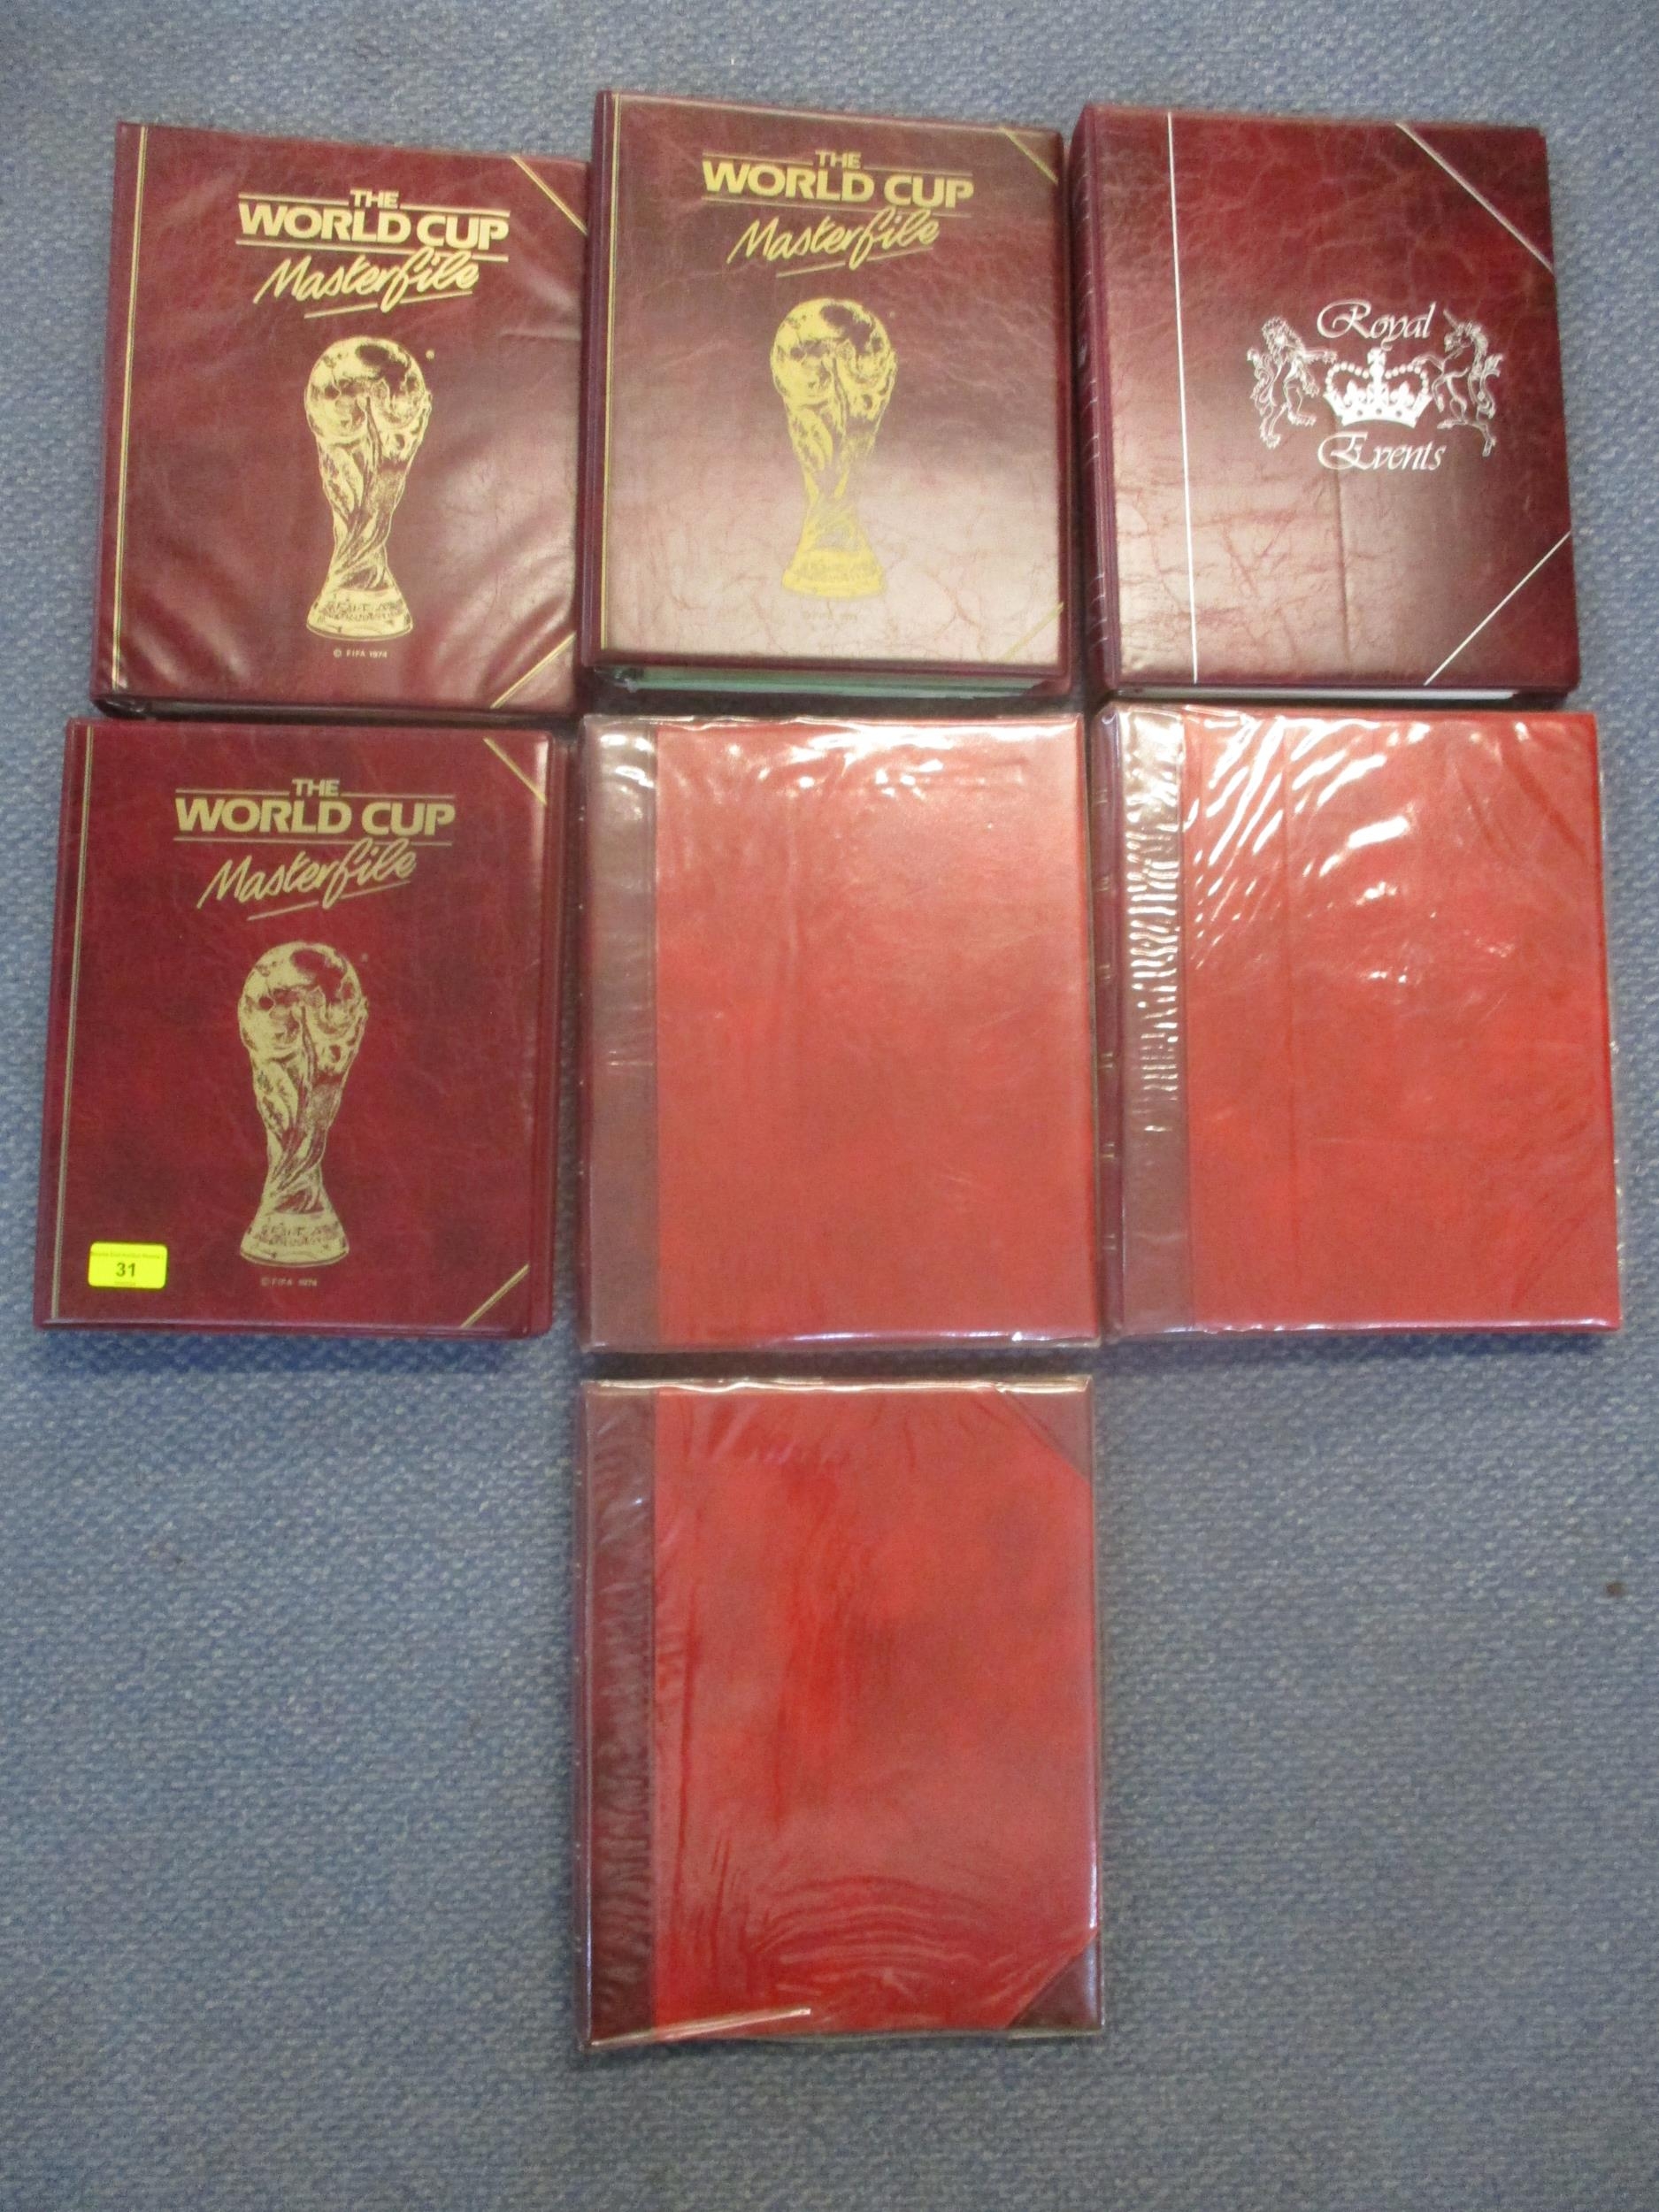 Seven albums of commemorative and world stamps to include three albums of The World Cup Masterfile